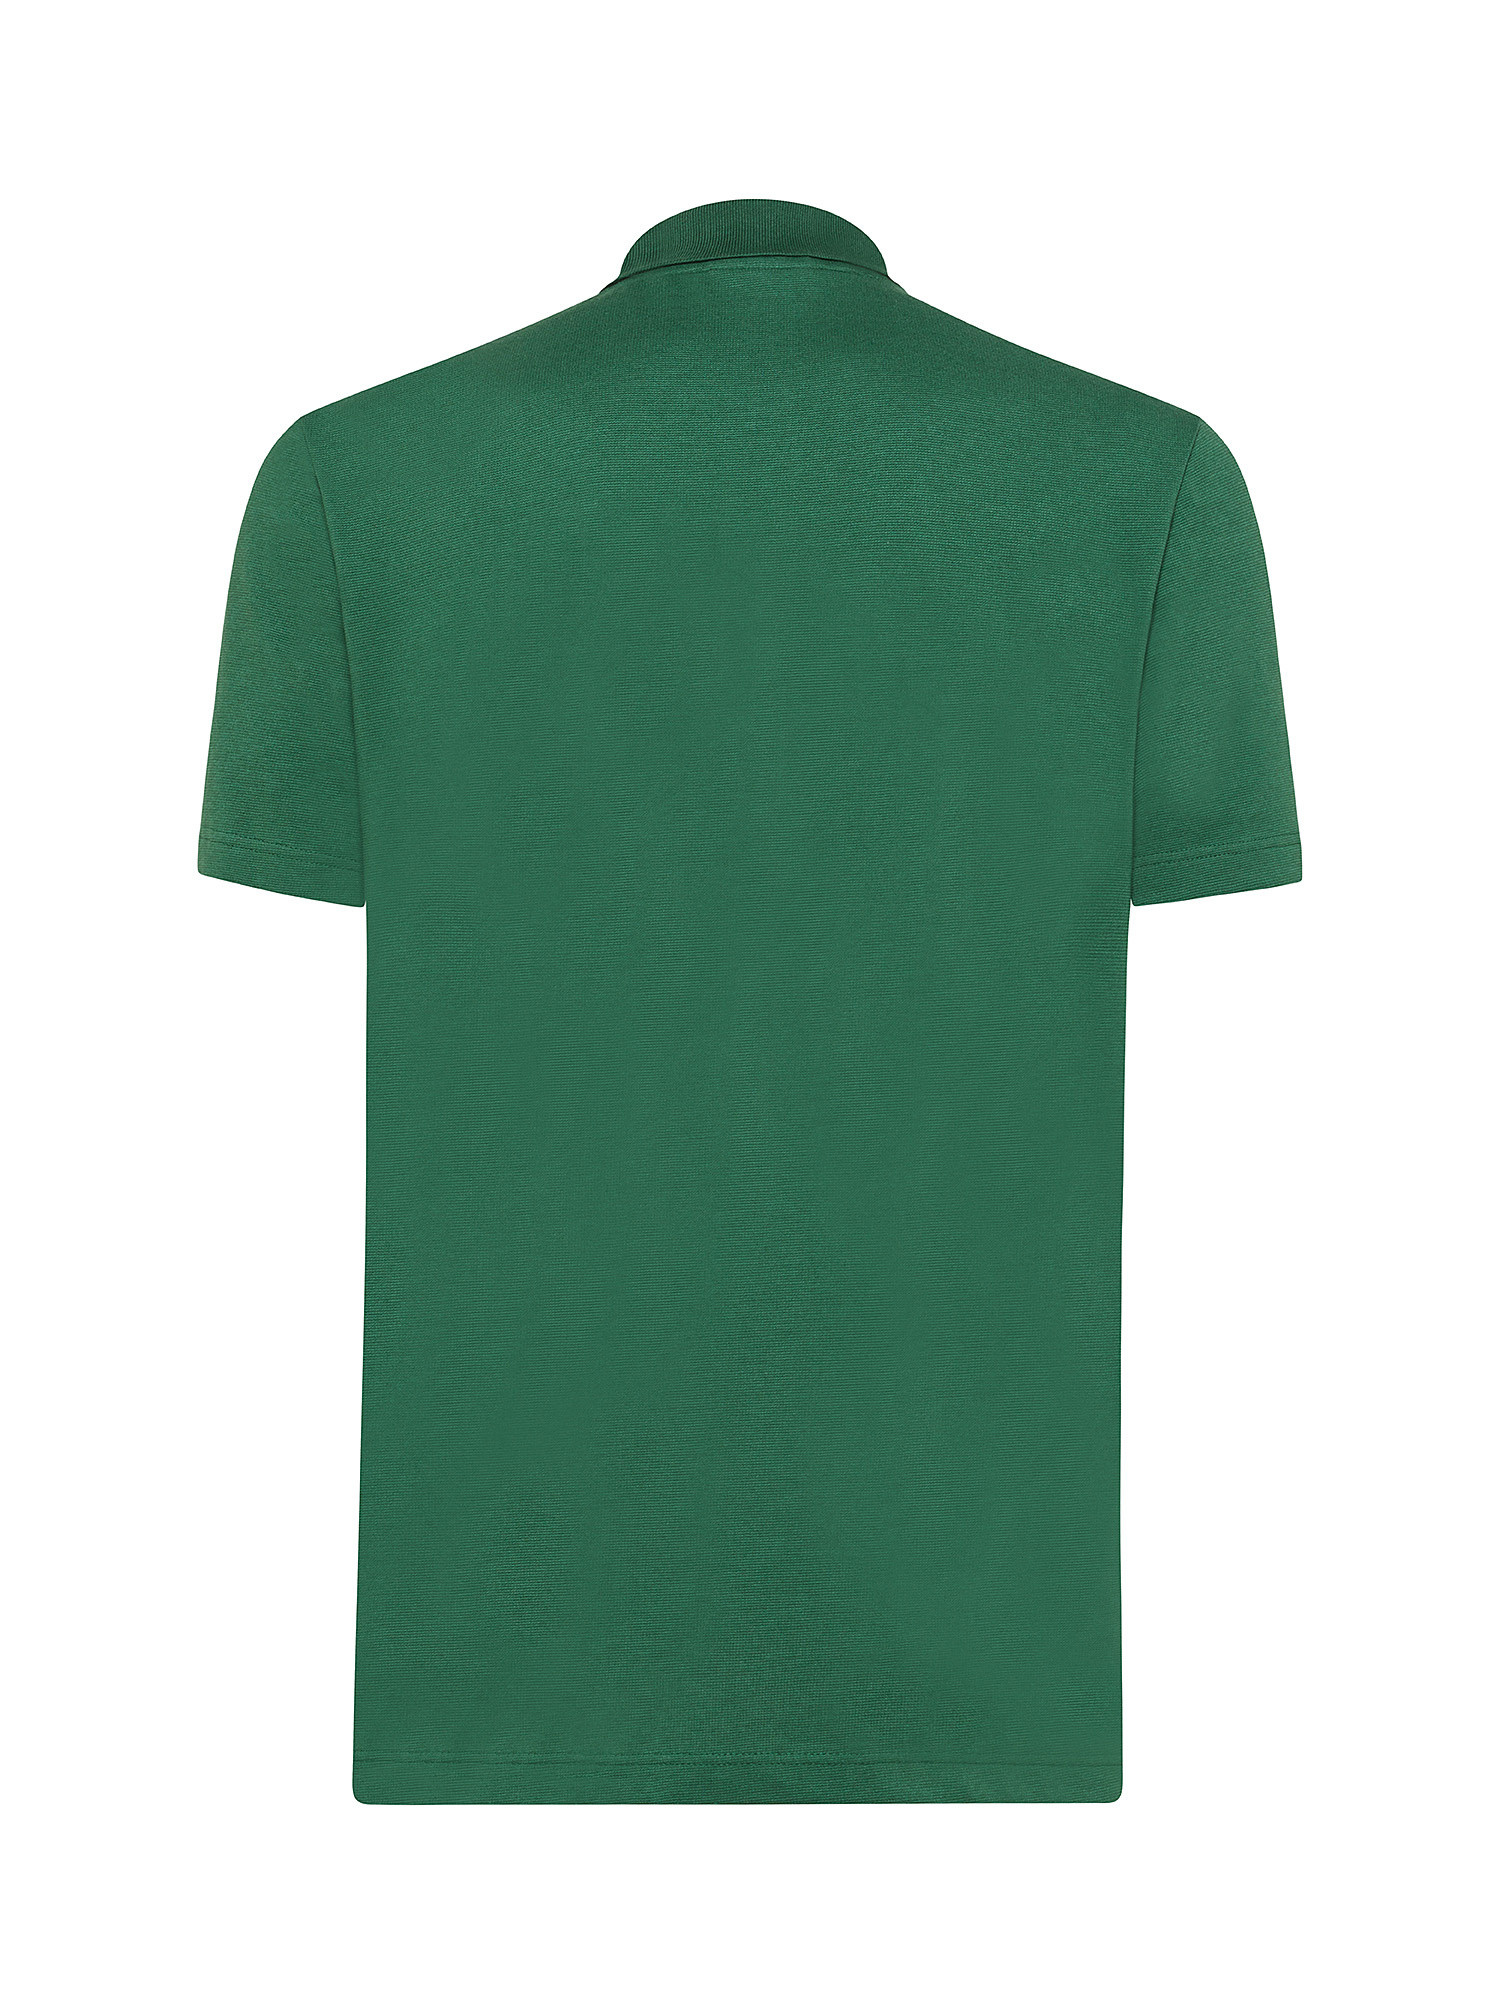 Lacoste - Polo stretch regular fit, Verde, large image number 1